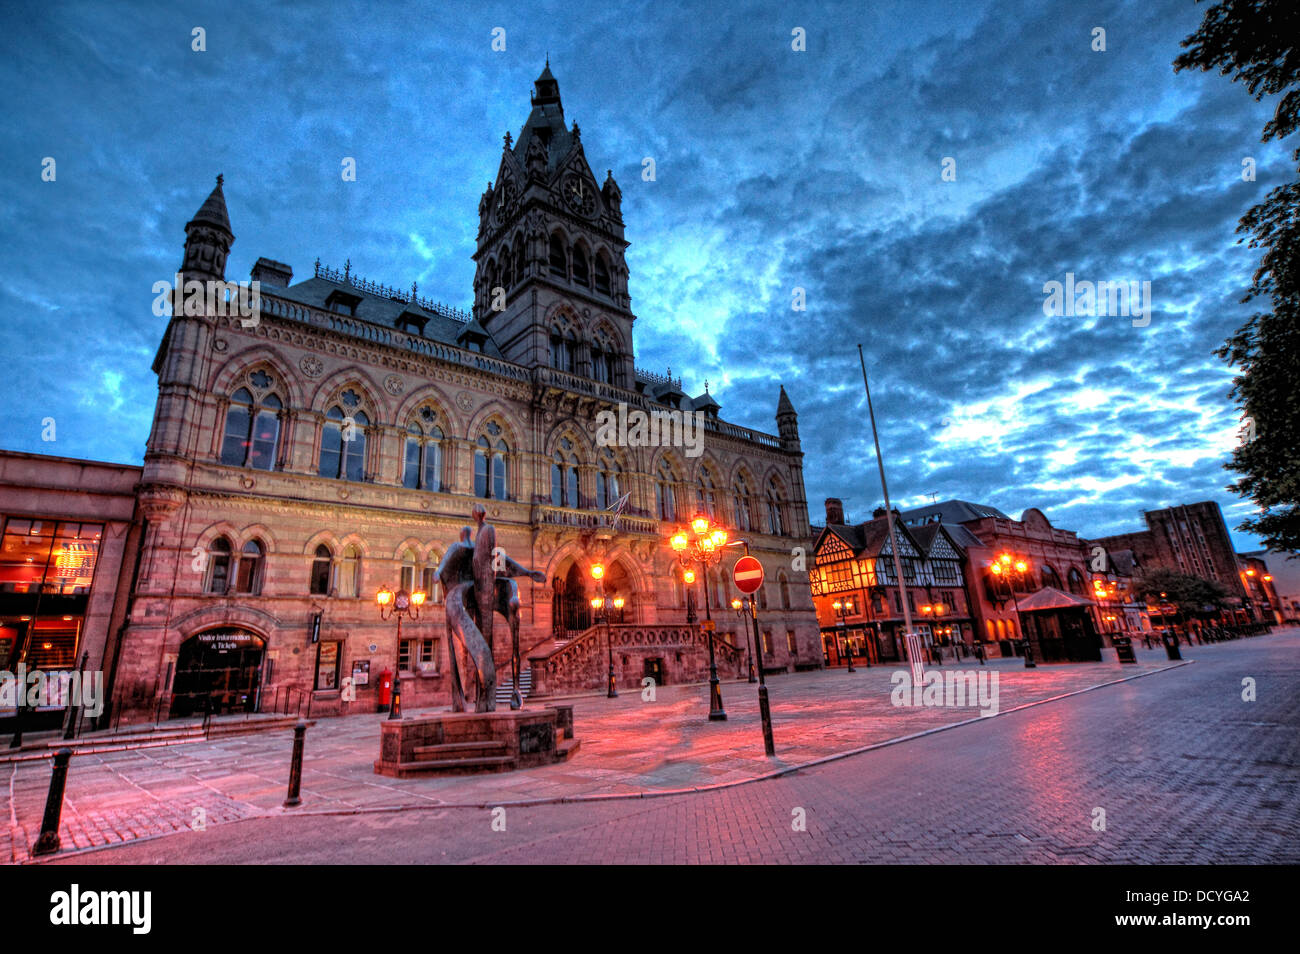 Chester town hall I n the city of Chester, (Deva) NW England, UK taken at dusk, with a deep blue sky Stock Photo